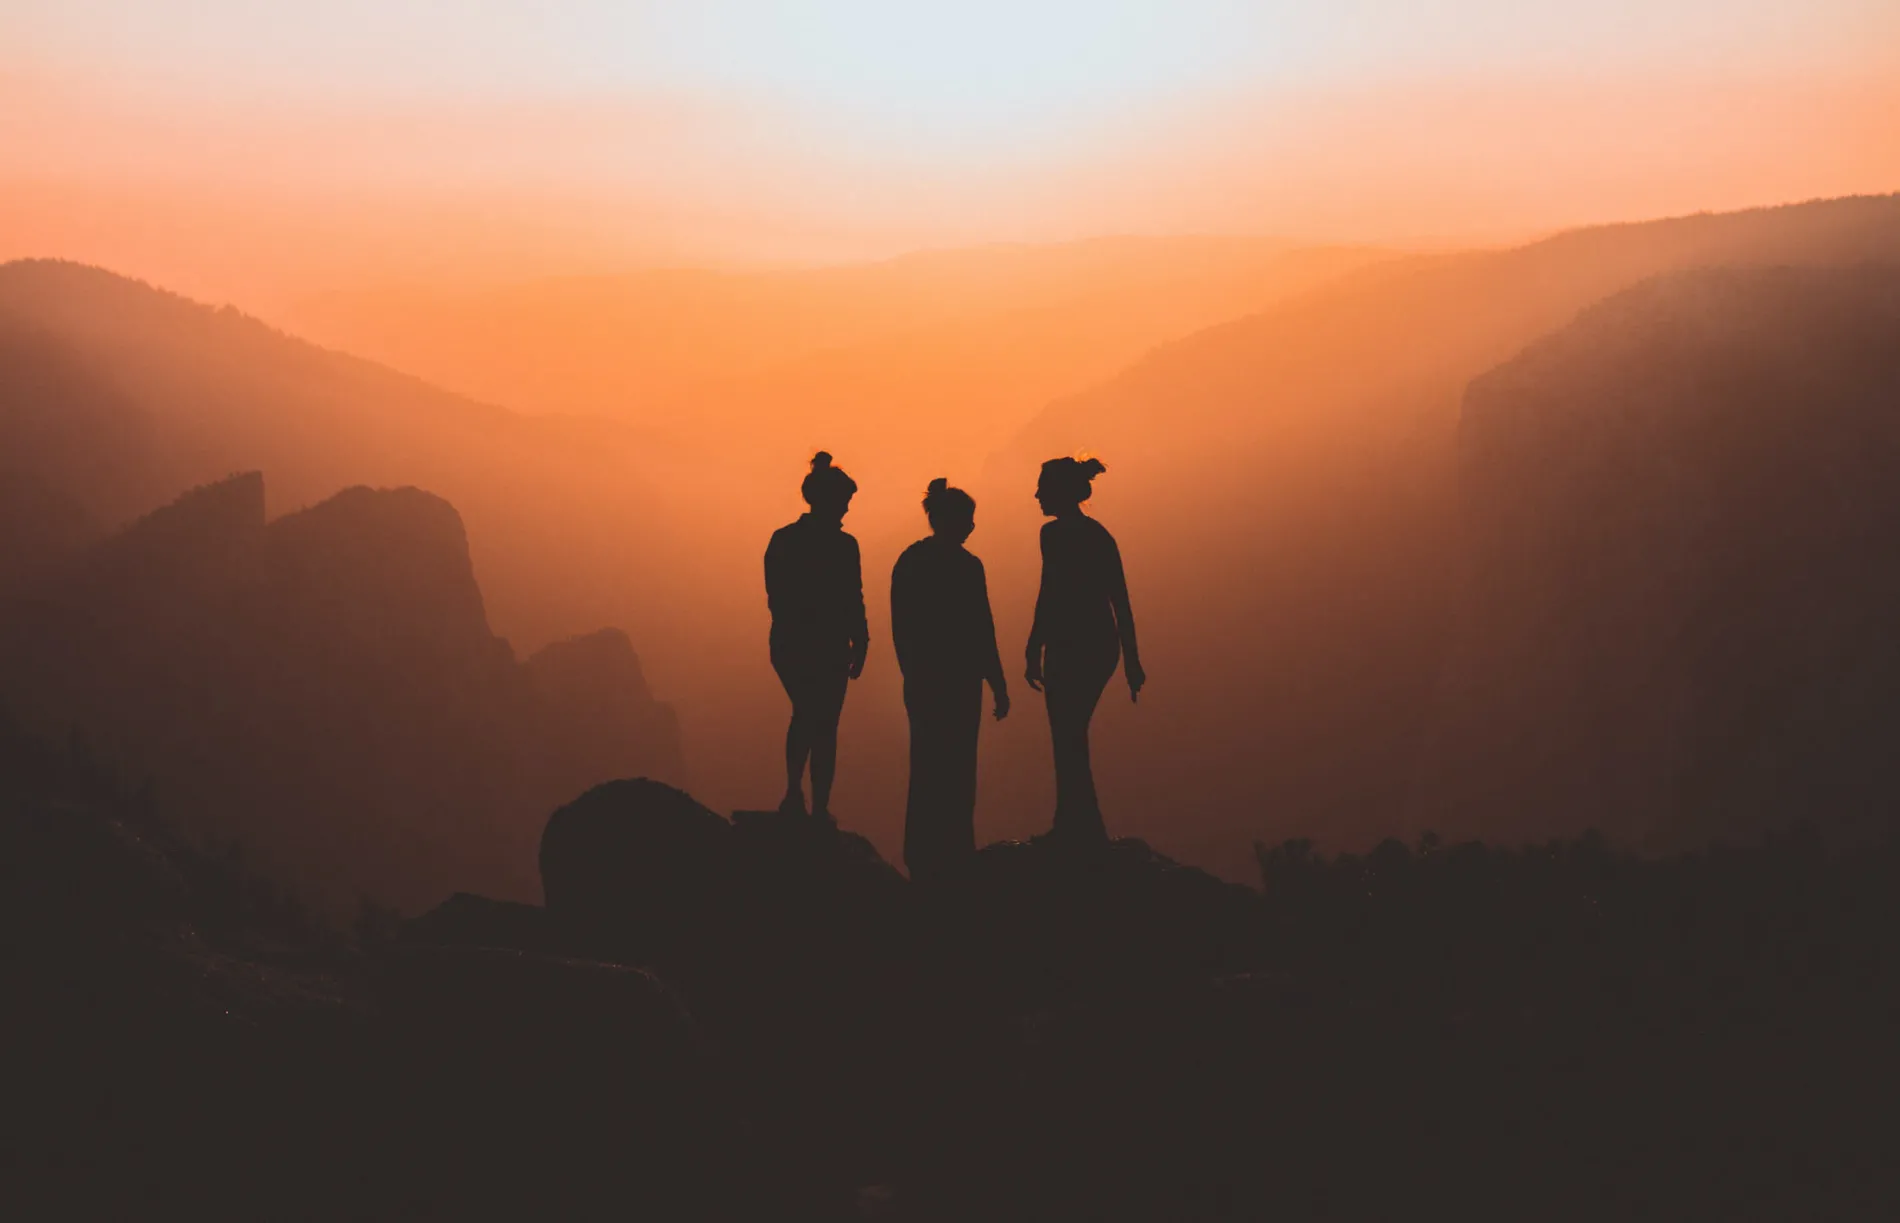 3 people on top of a mountain at sunset